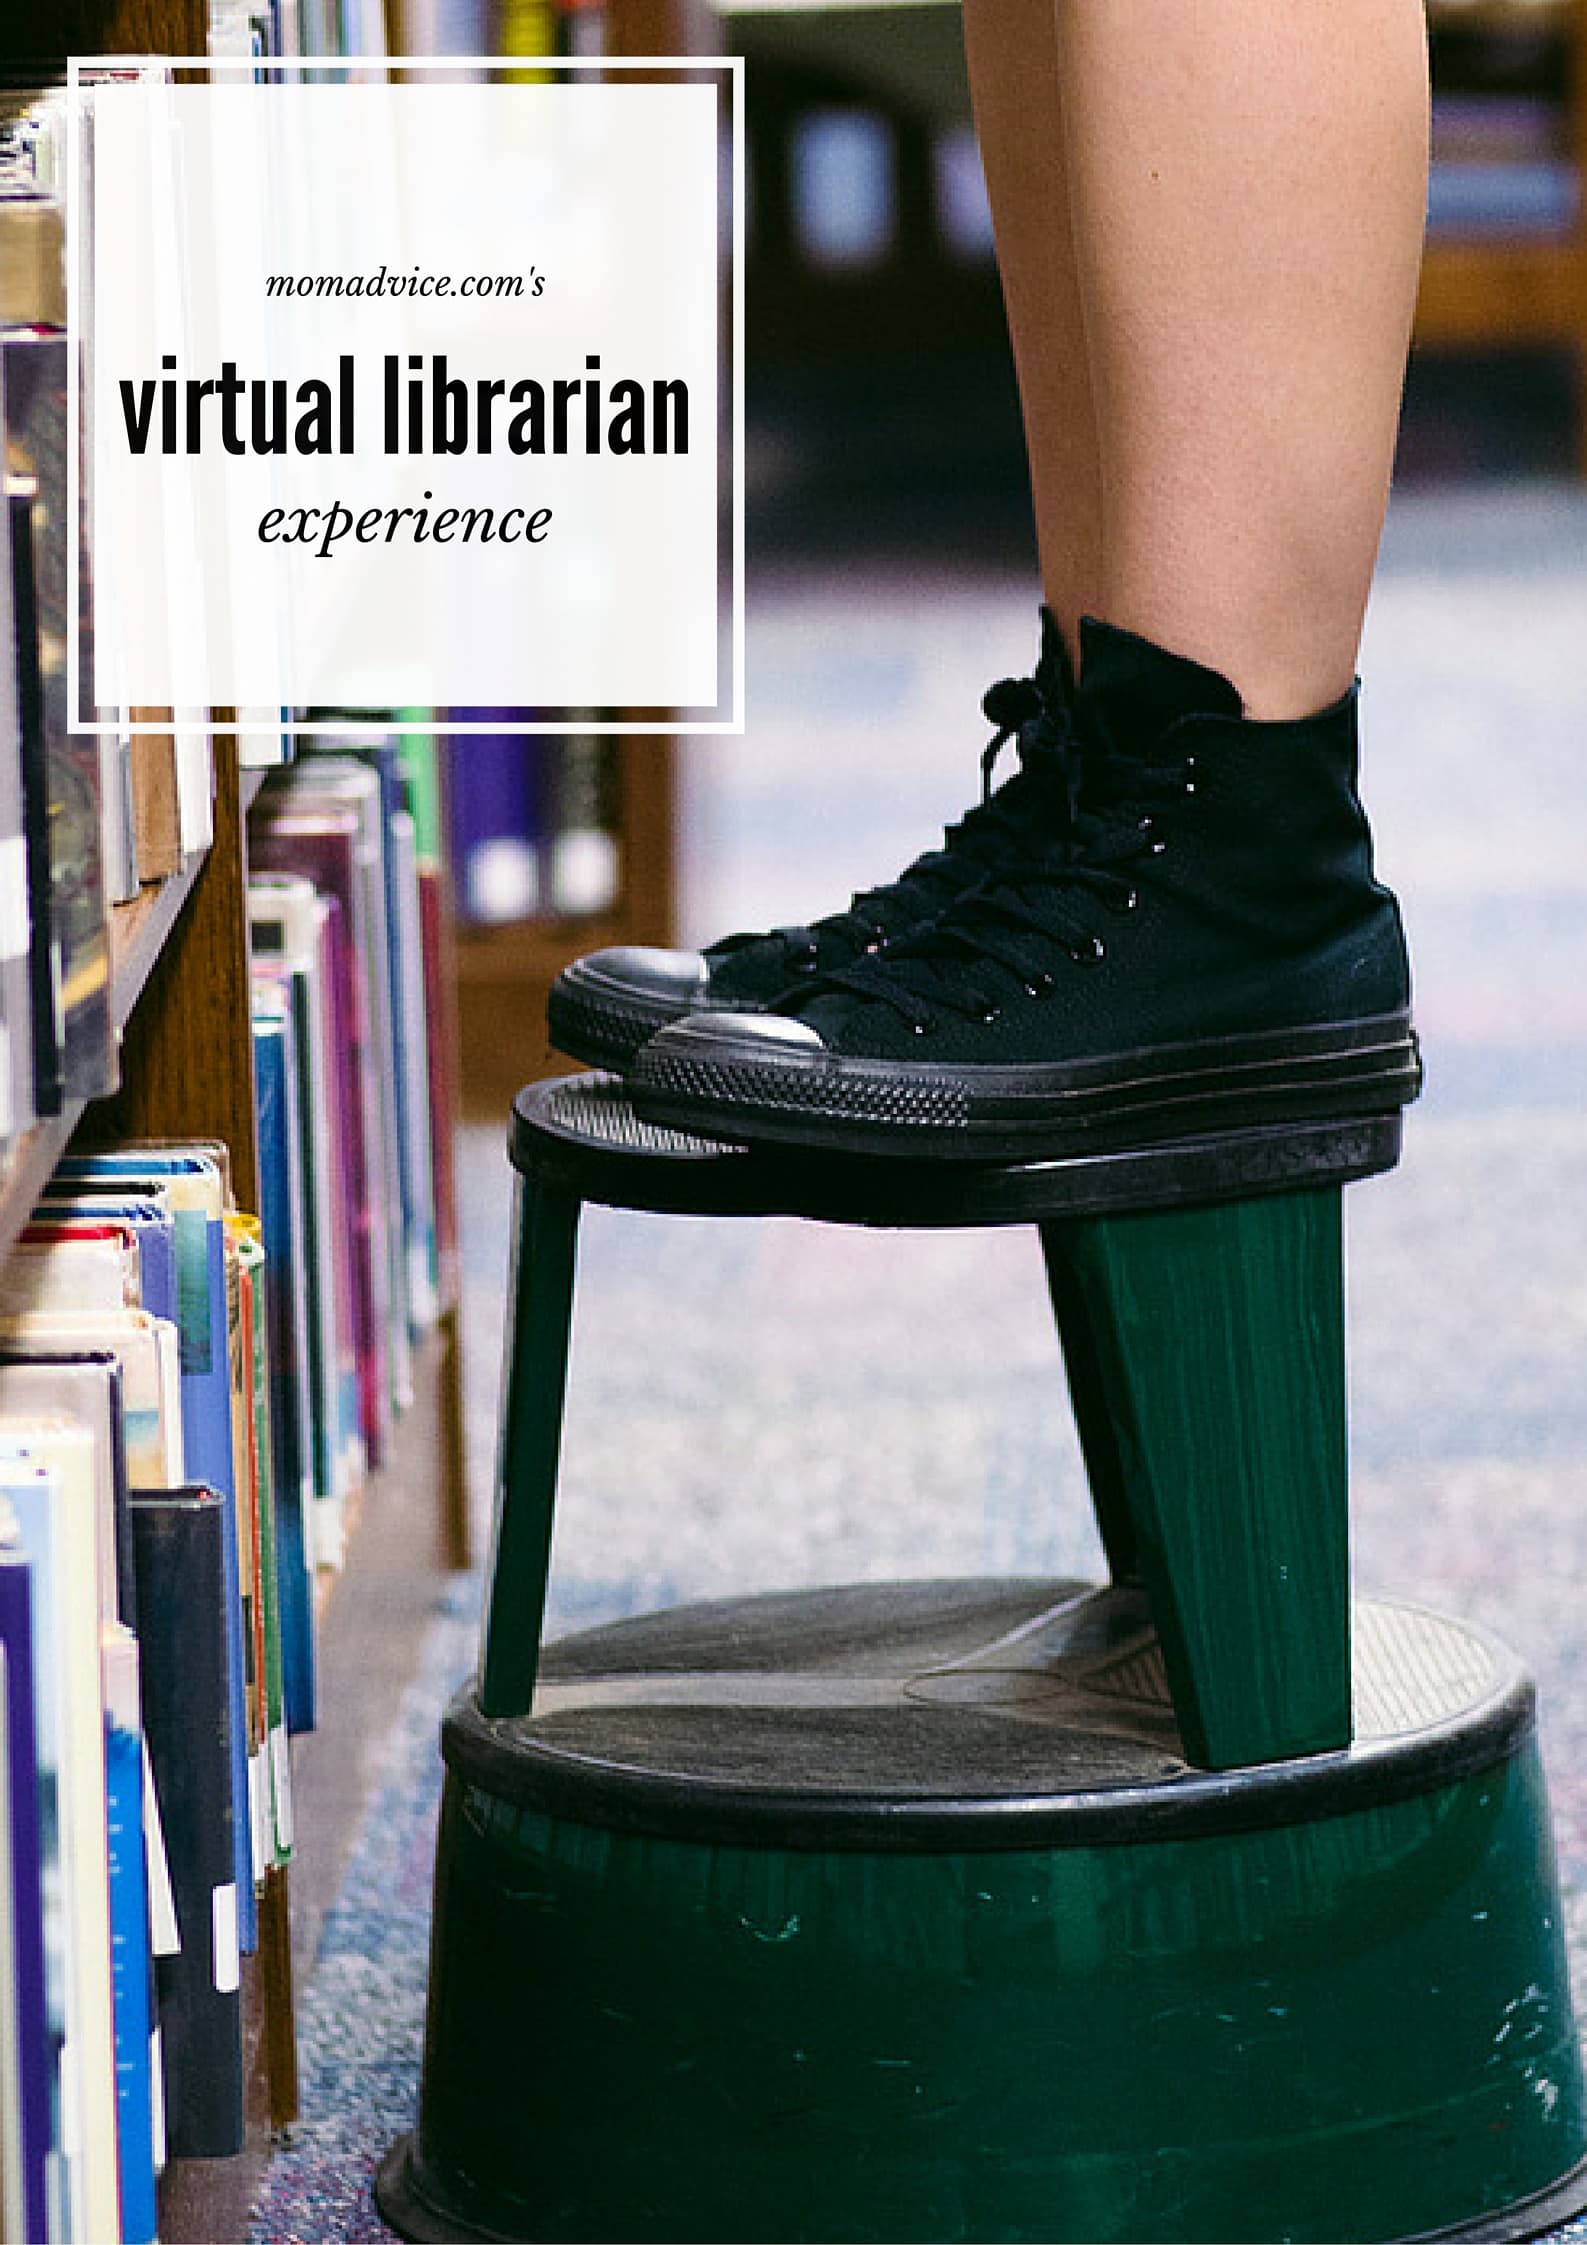 The Virtual Librarian Experience: Give Me a Good Mystery